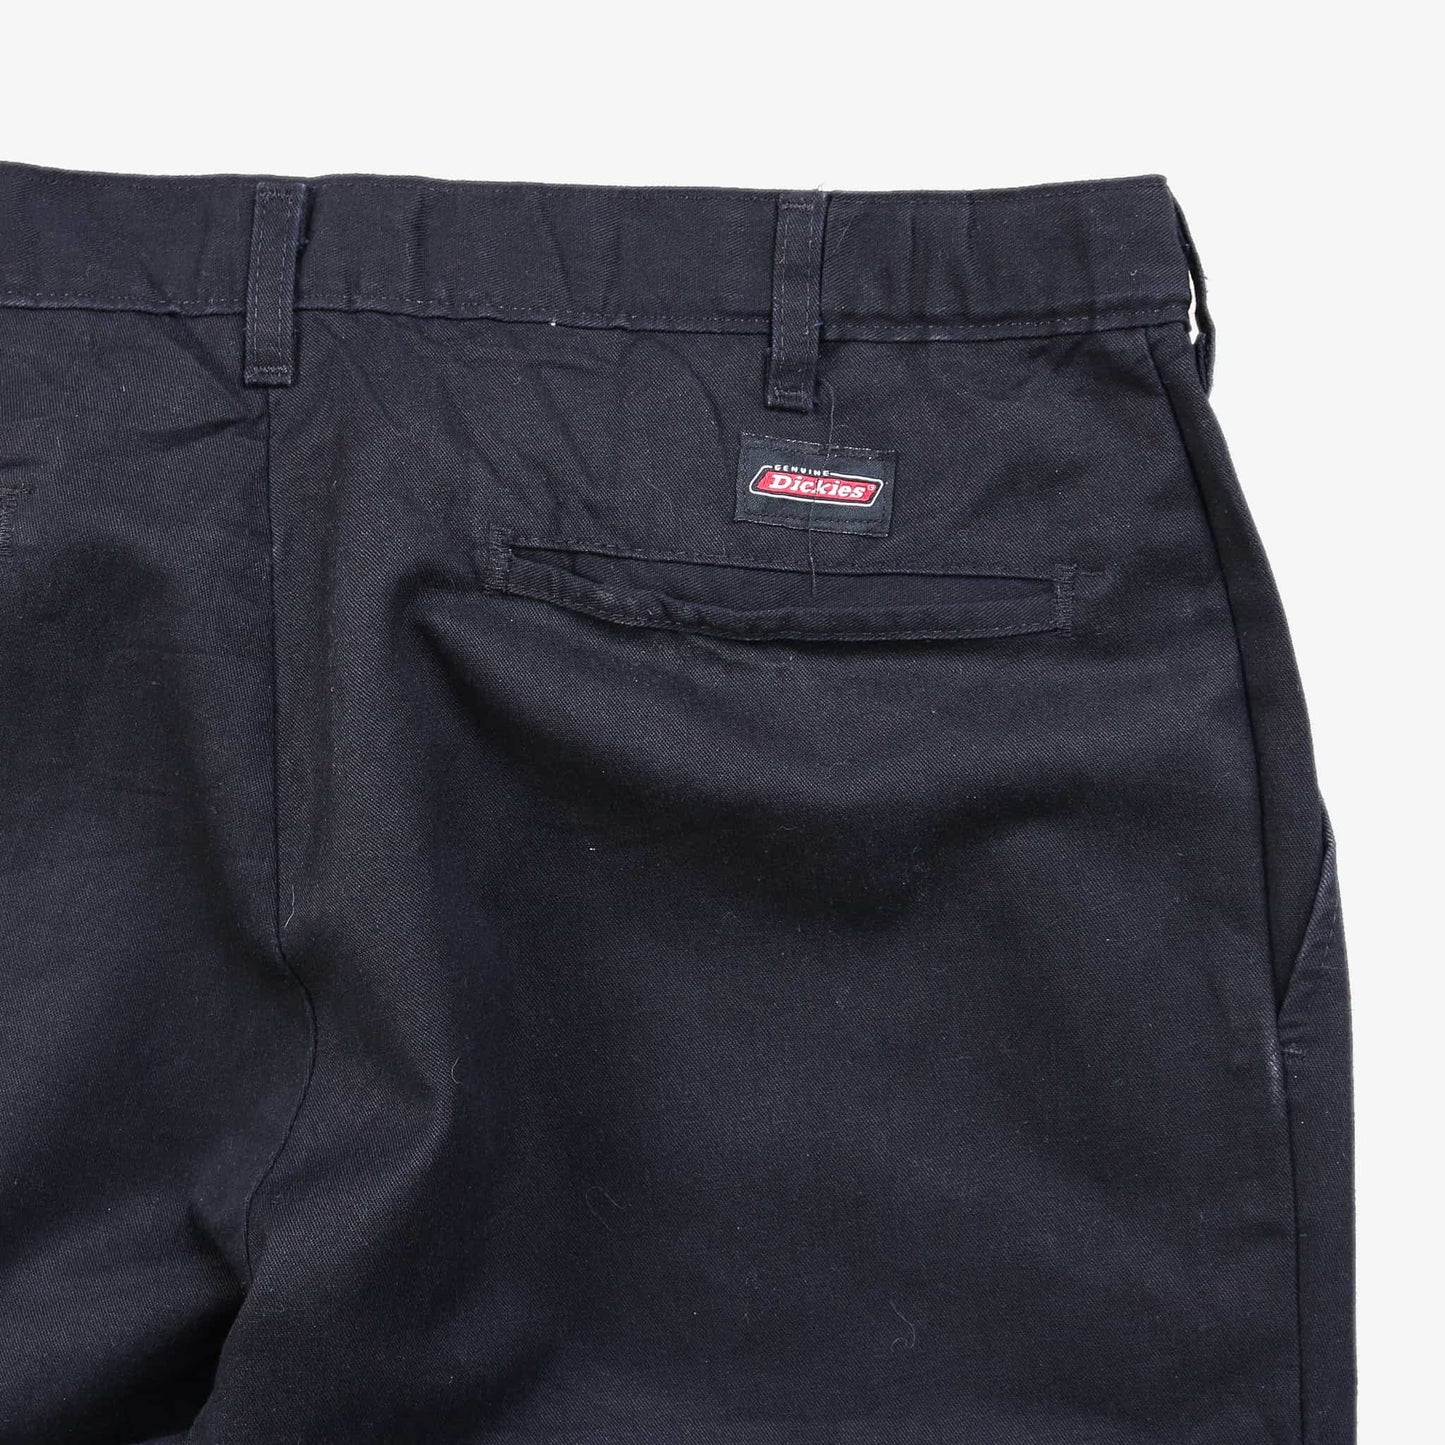 Pleated Work Trousers - Black - 36/30 - American Madness